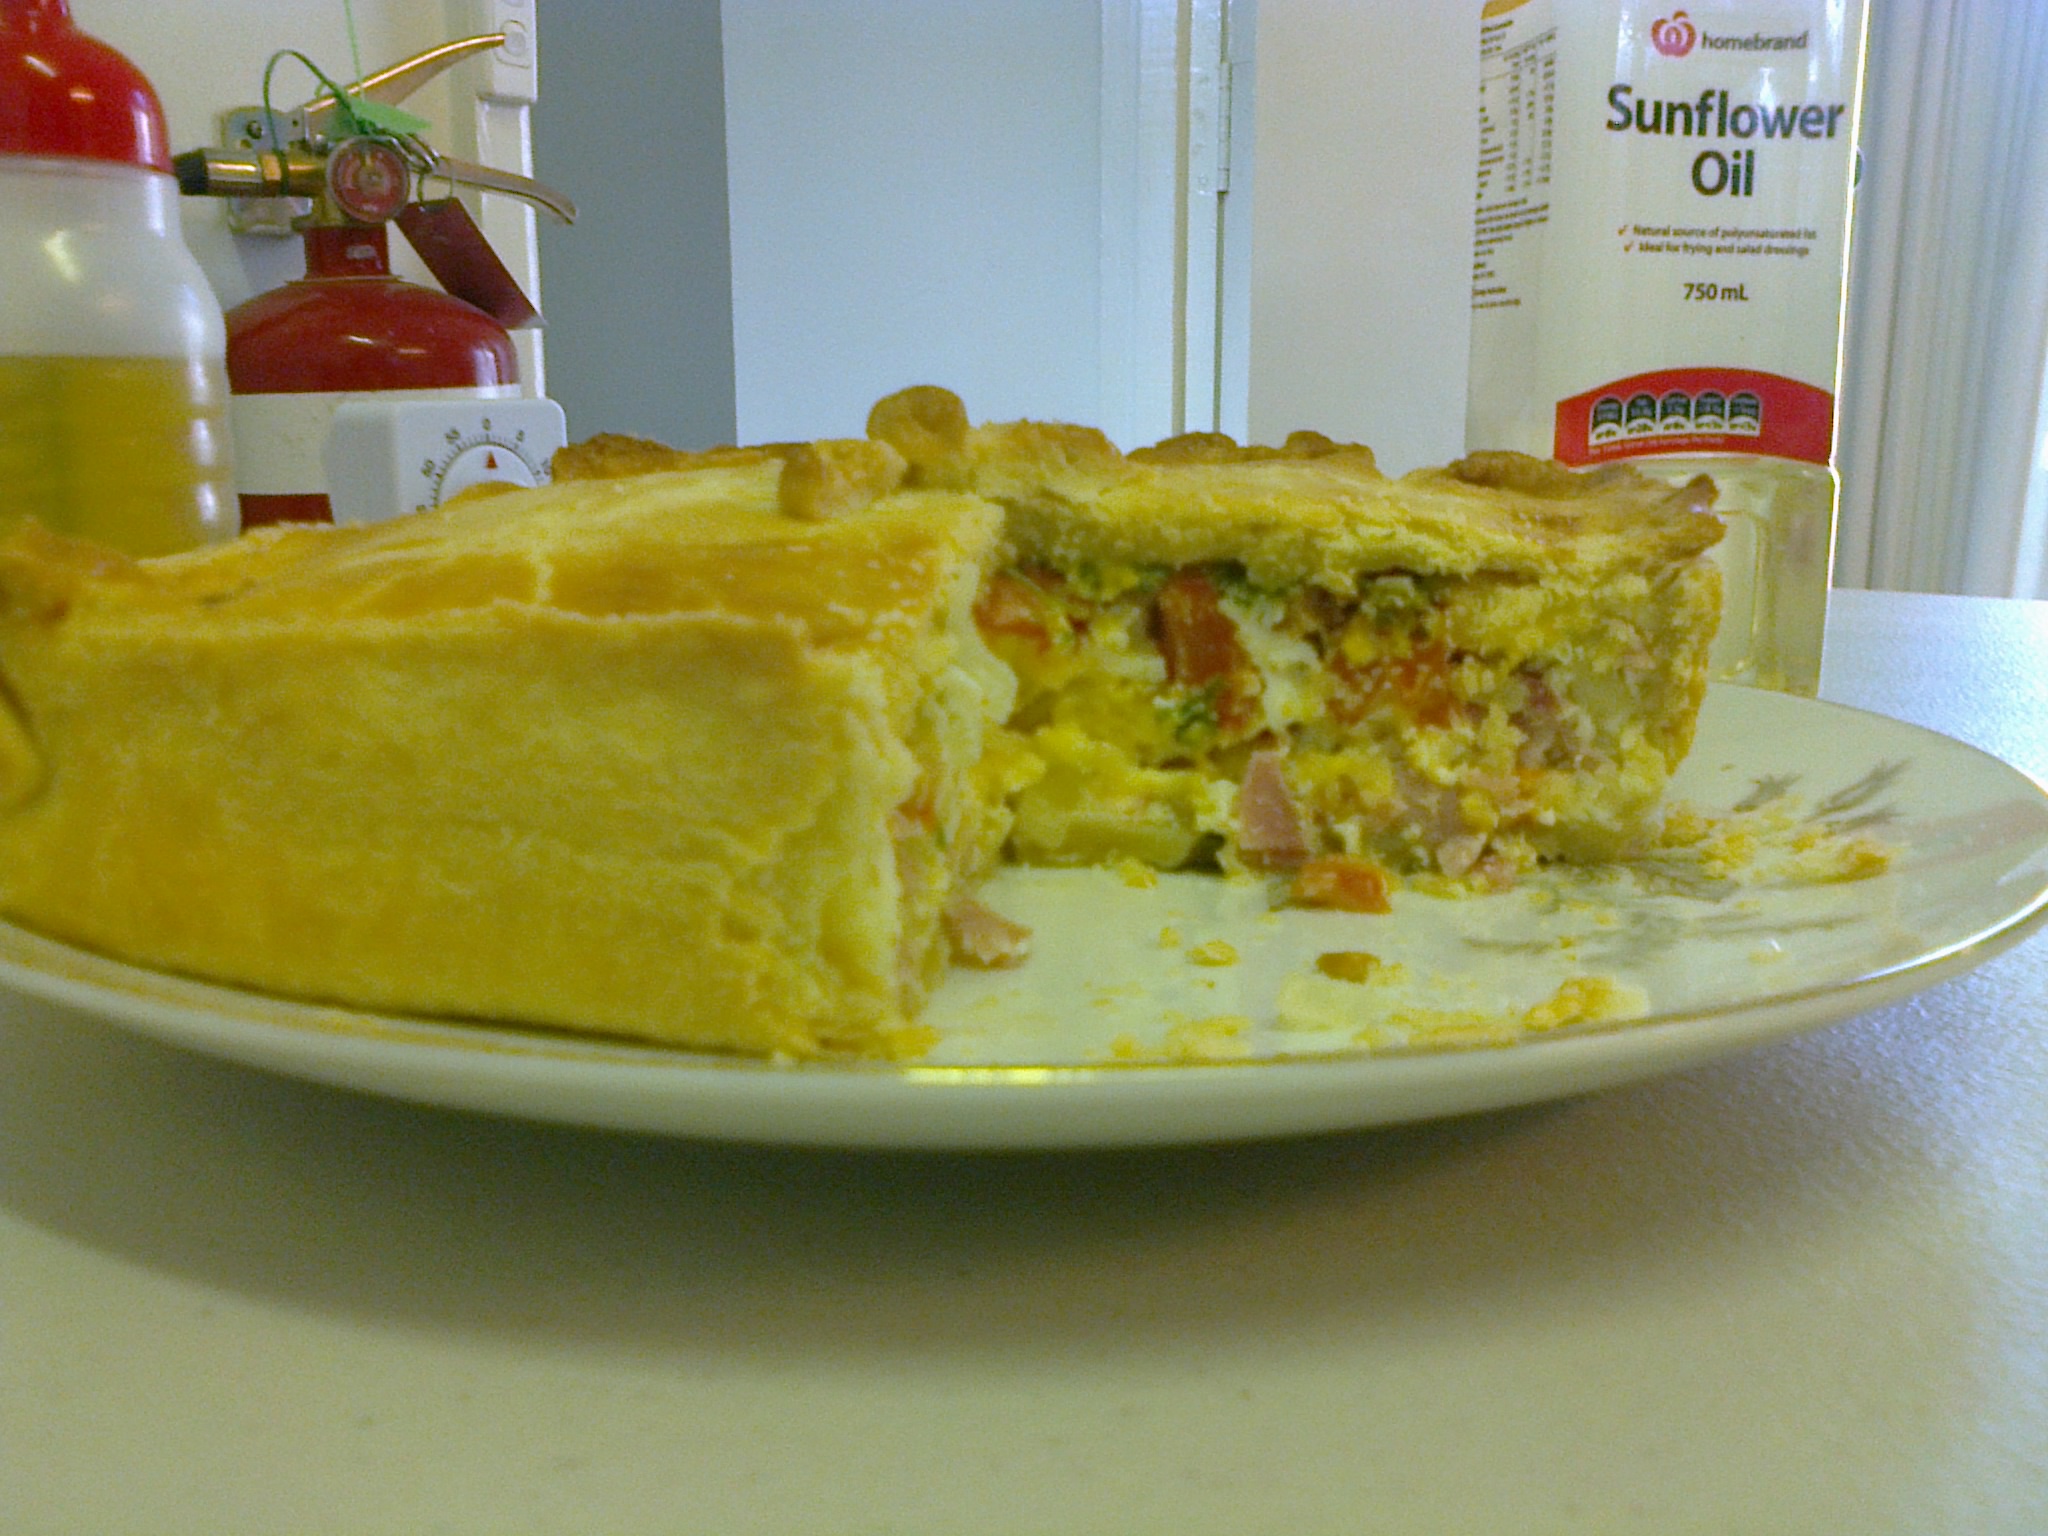 Louise shares her secret recipe for egg, bacon and tomato pie